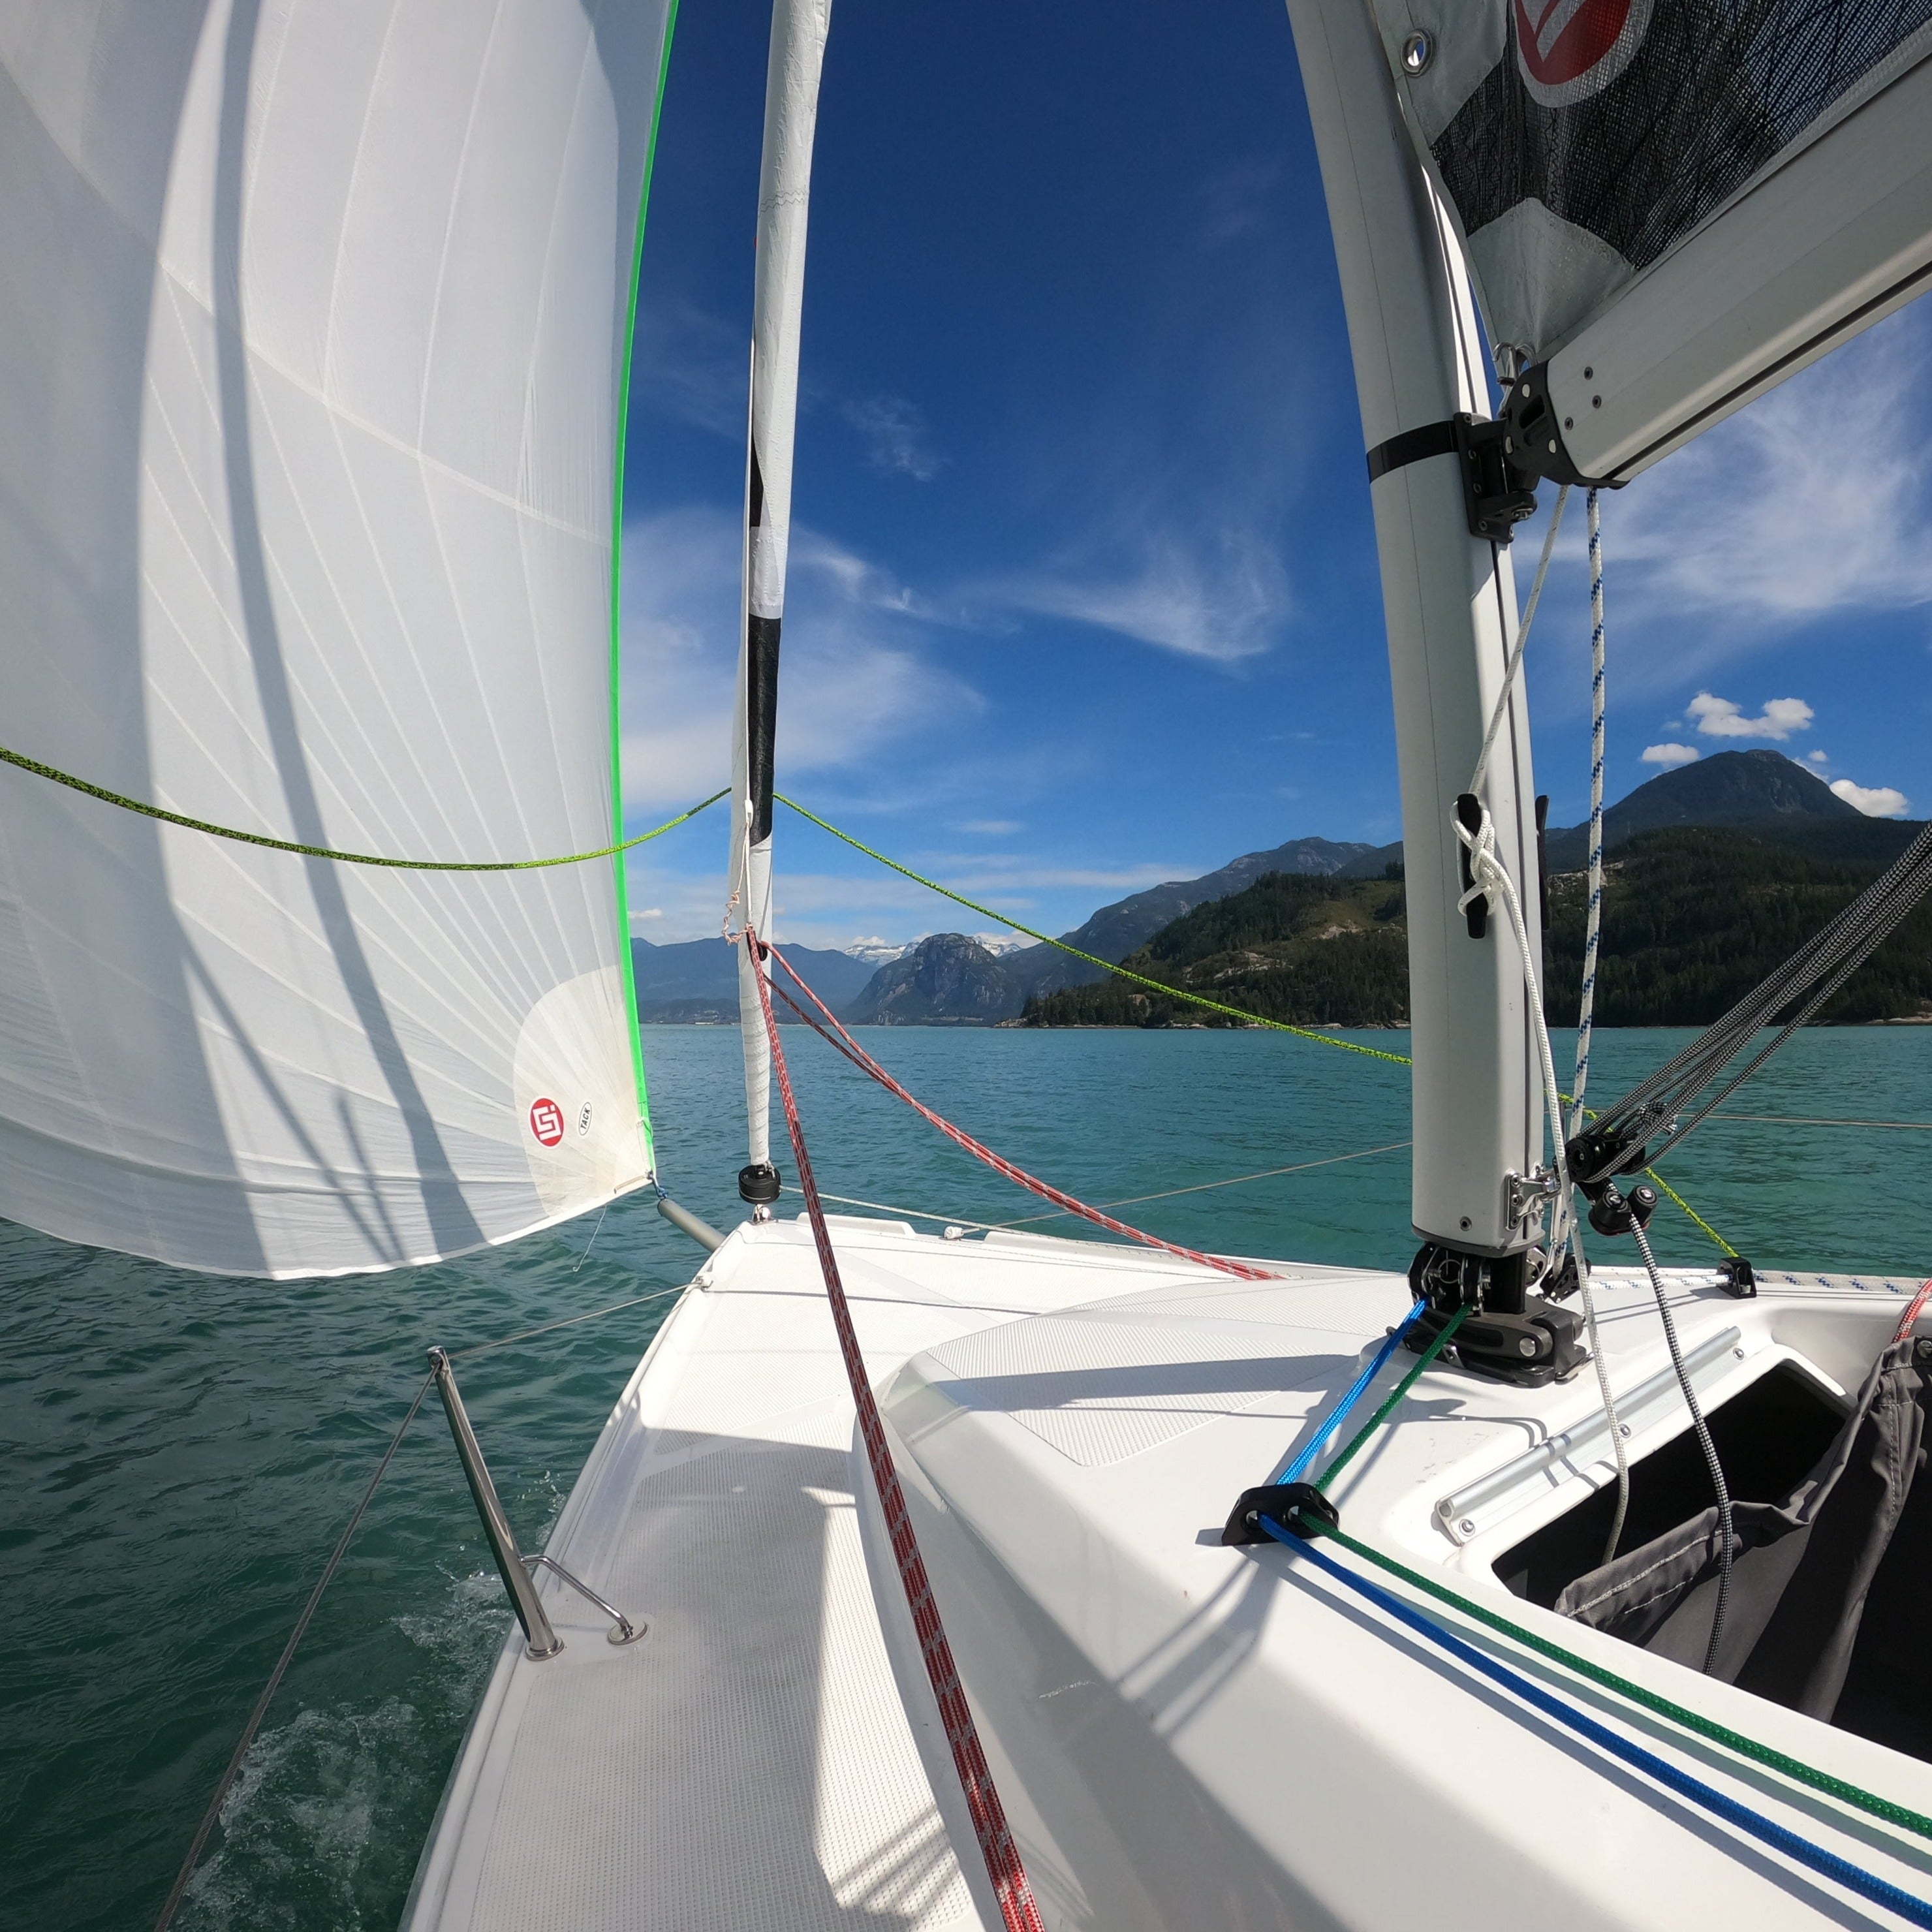 Sailing on howe sound with Inflow